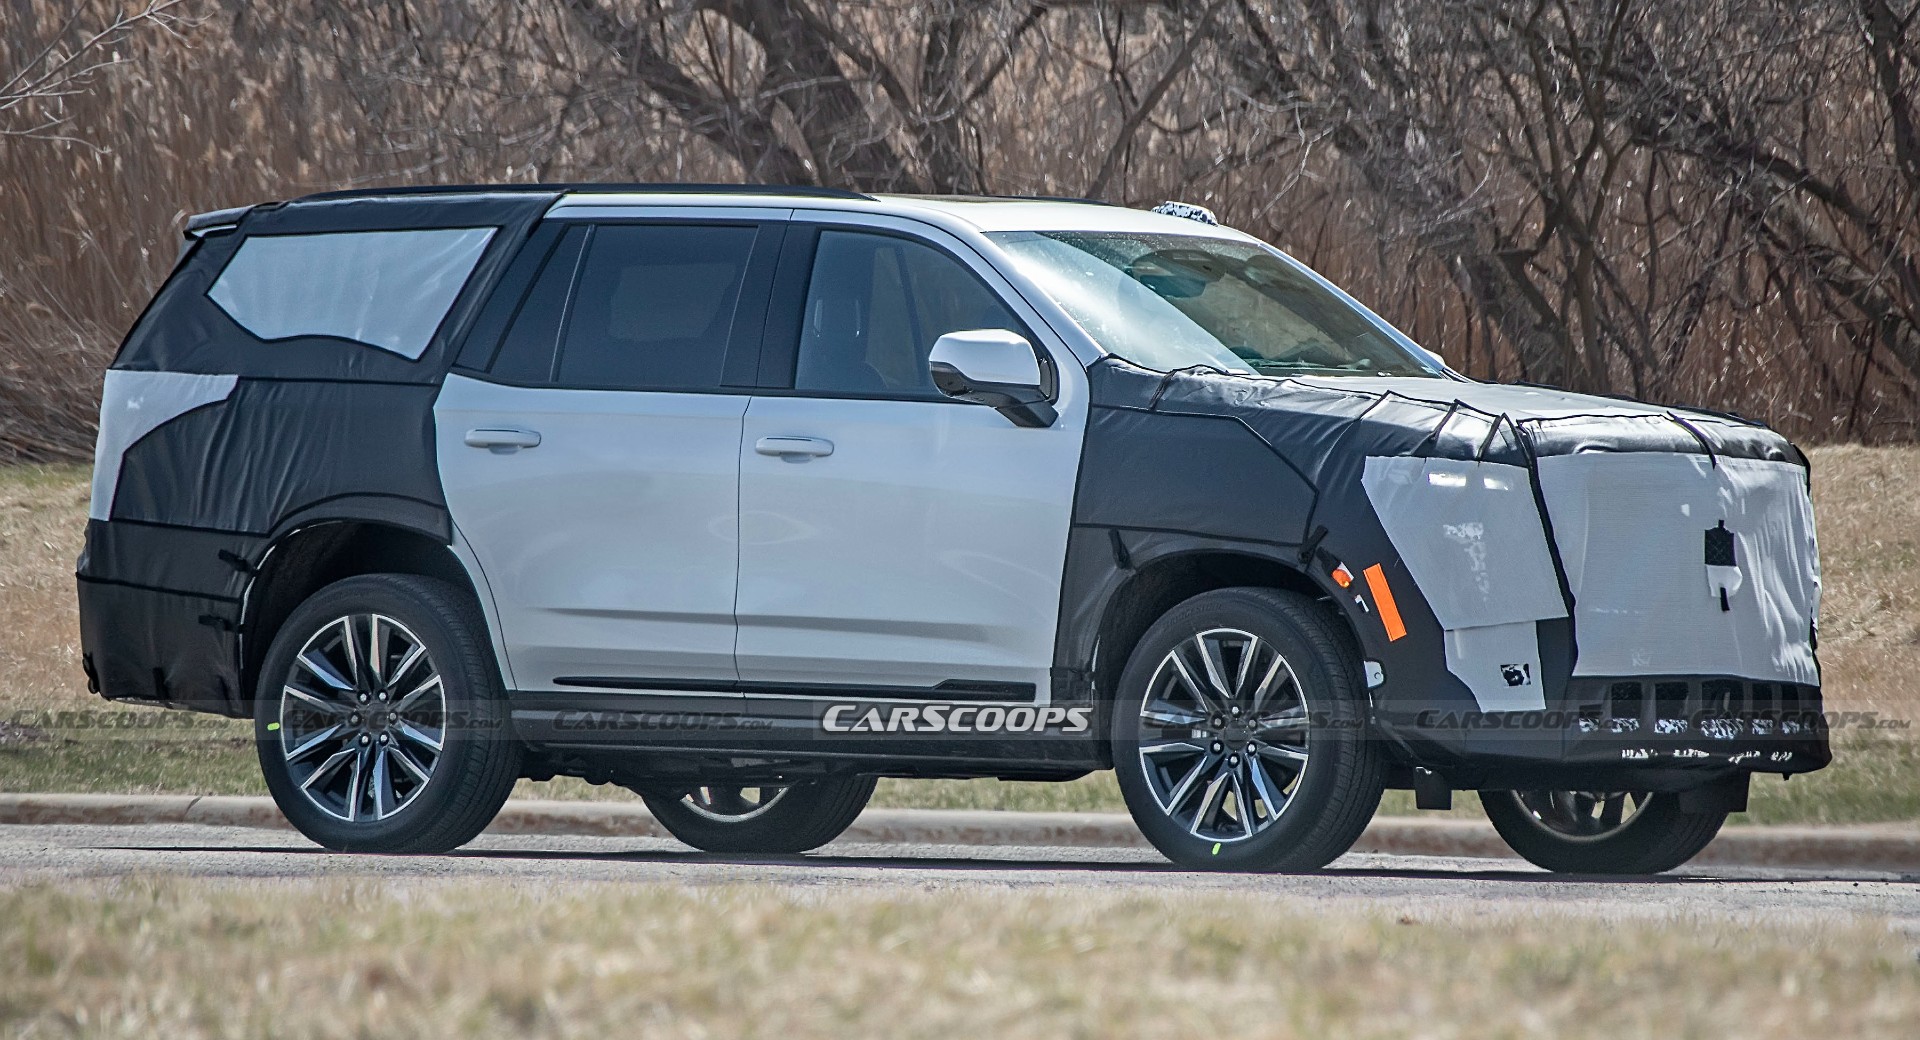 2024-cadillac-escalade-facelift-tries-to-hide-styling-tweaks-in-new-spy-shots-carscoops